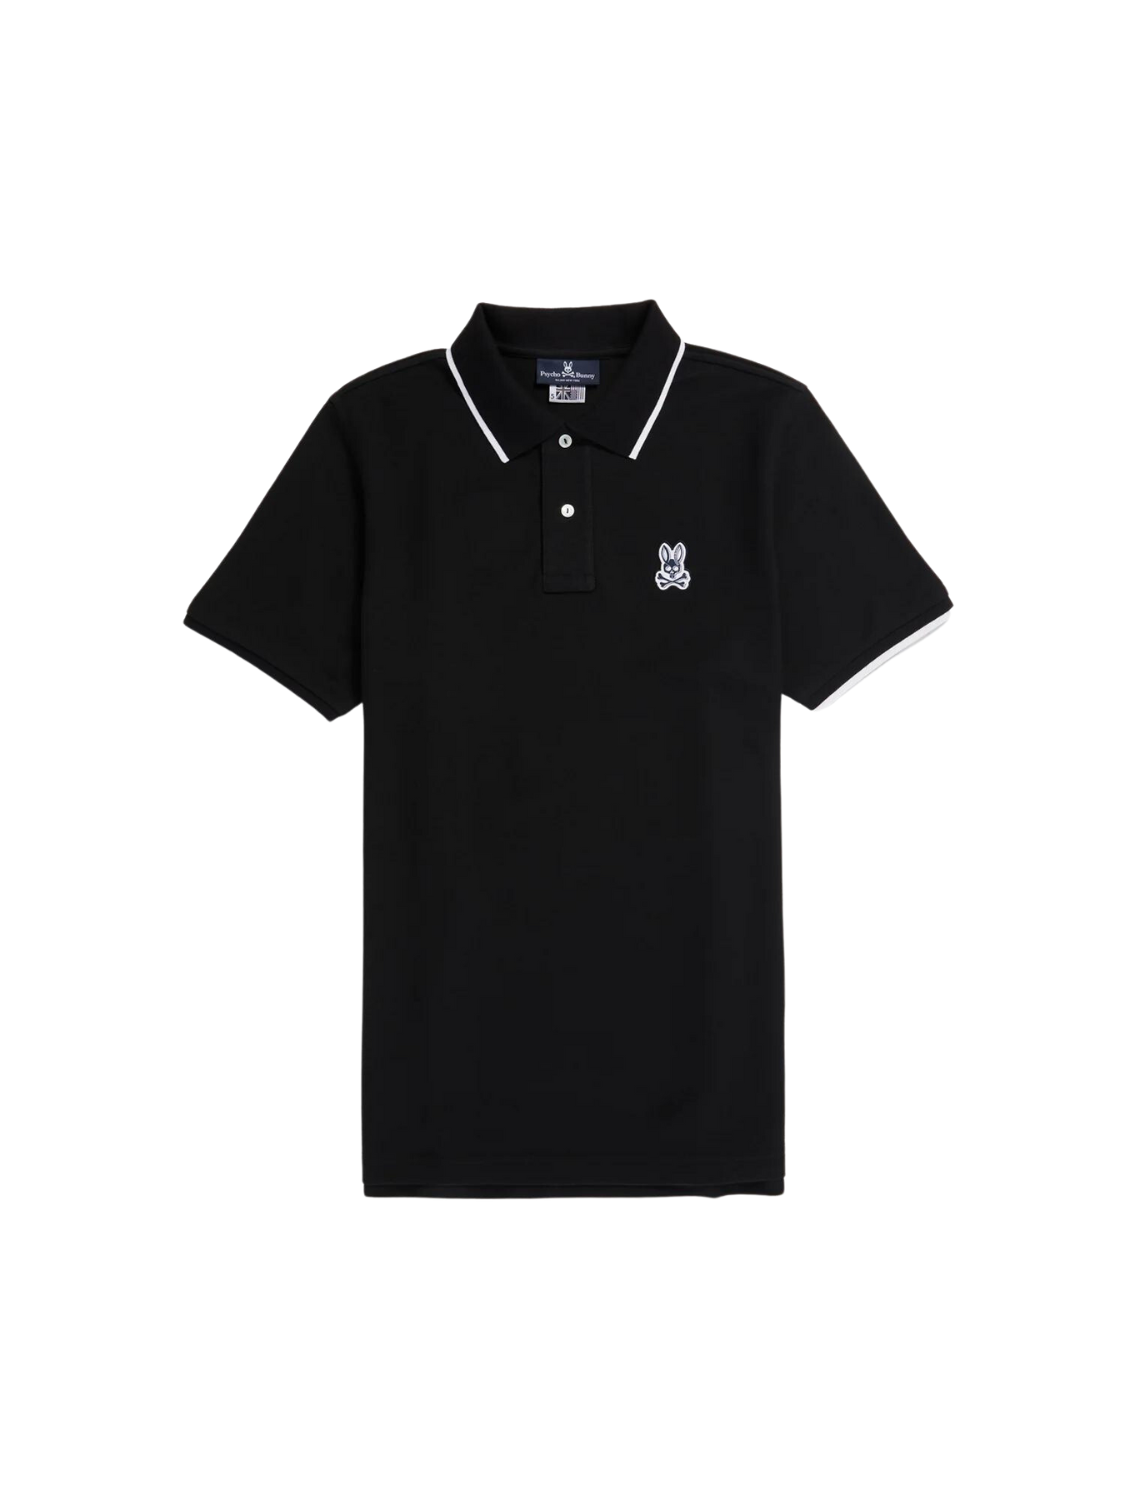 men's Serge Pique fashion polo boasts a crisp silhouette with understated contrasts at the collar and cuffs